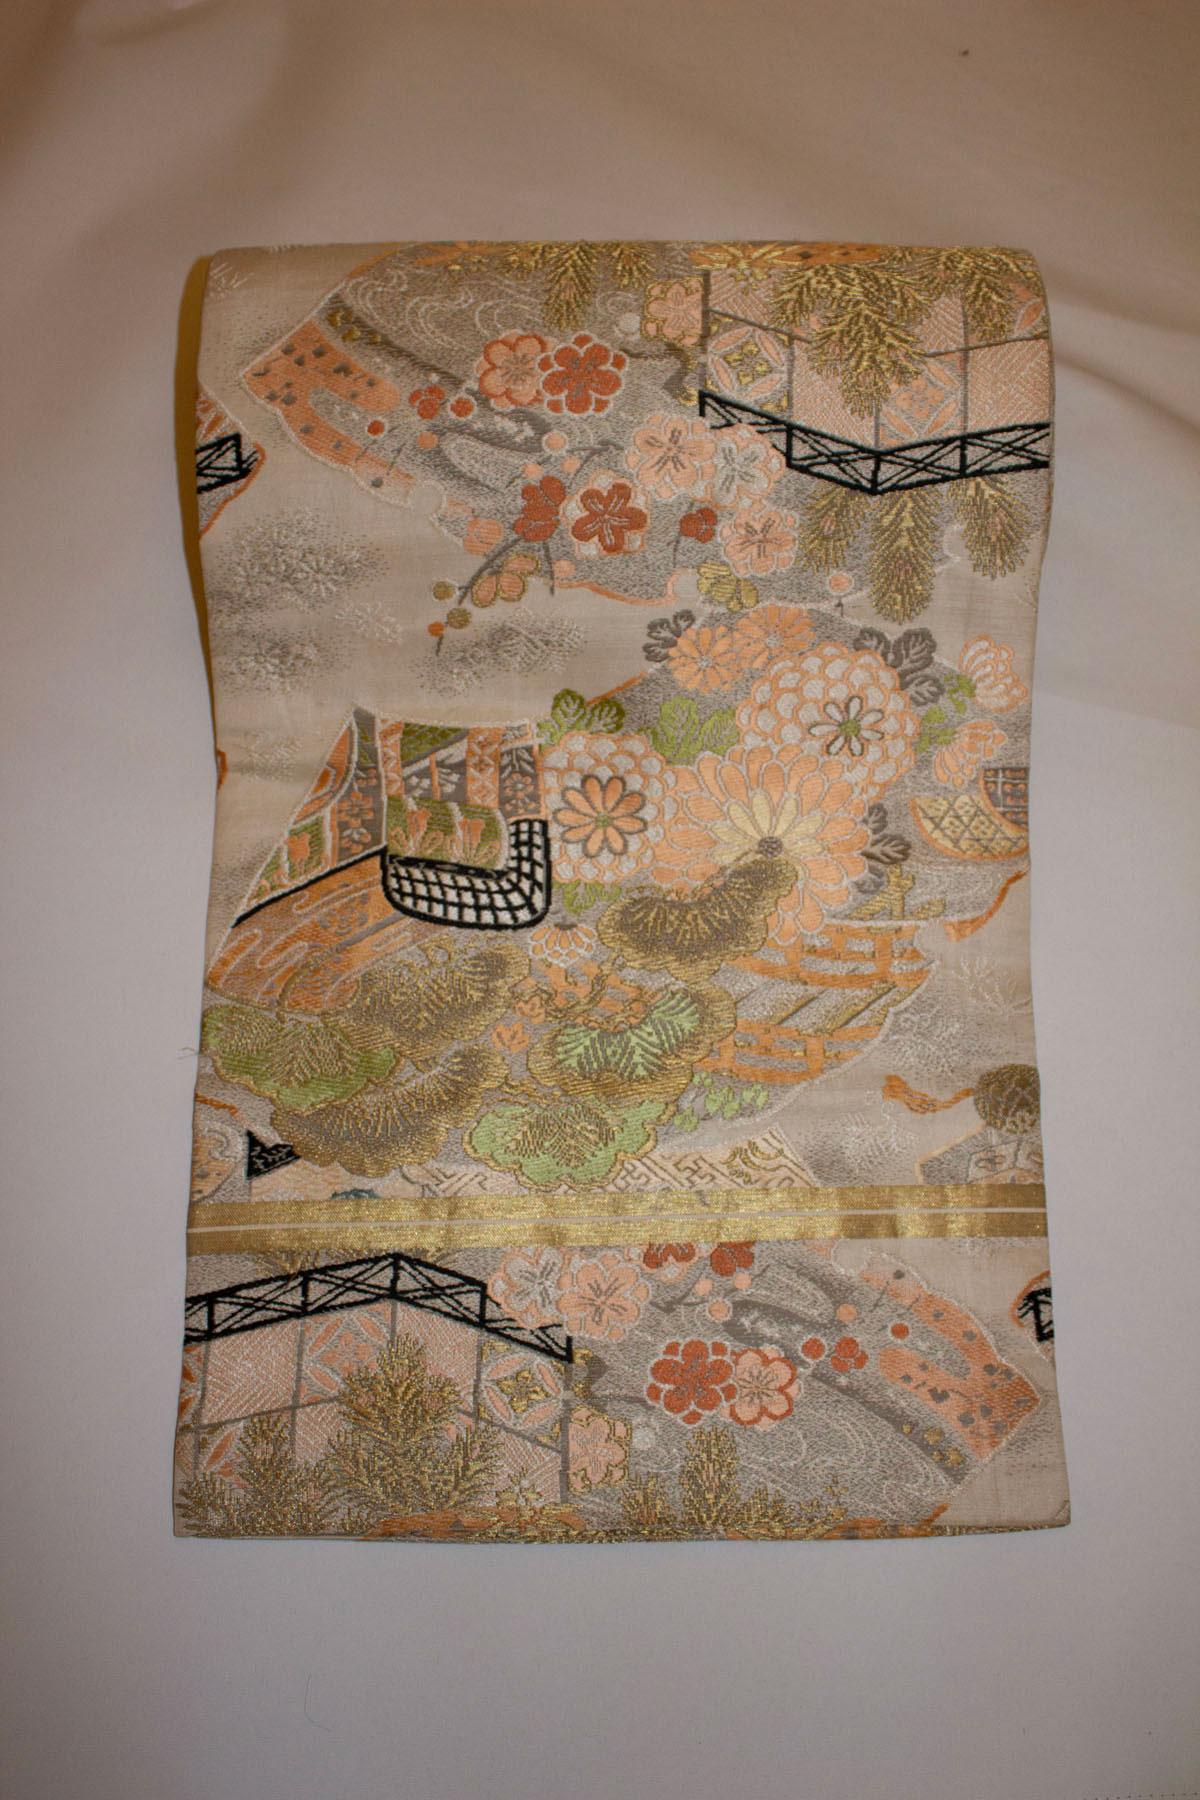 A pretty vintage Maru Obi Belt . These belts are the most formal of obi belts. They  have a pattern on both sides, in this case a floral scene in green, peach and black.  They would mostly have been worn by geisha and mariko.
Measurements: Height 12